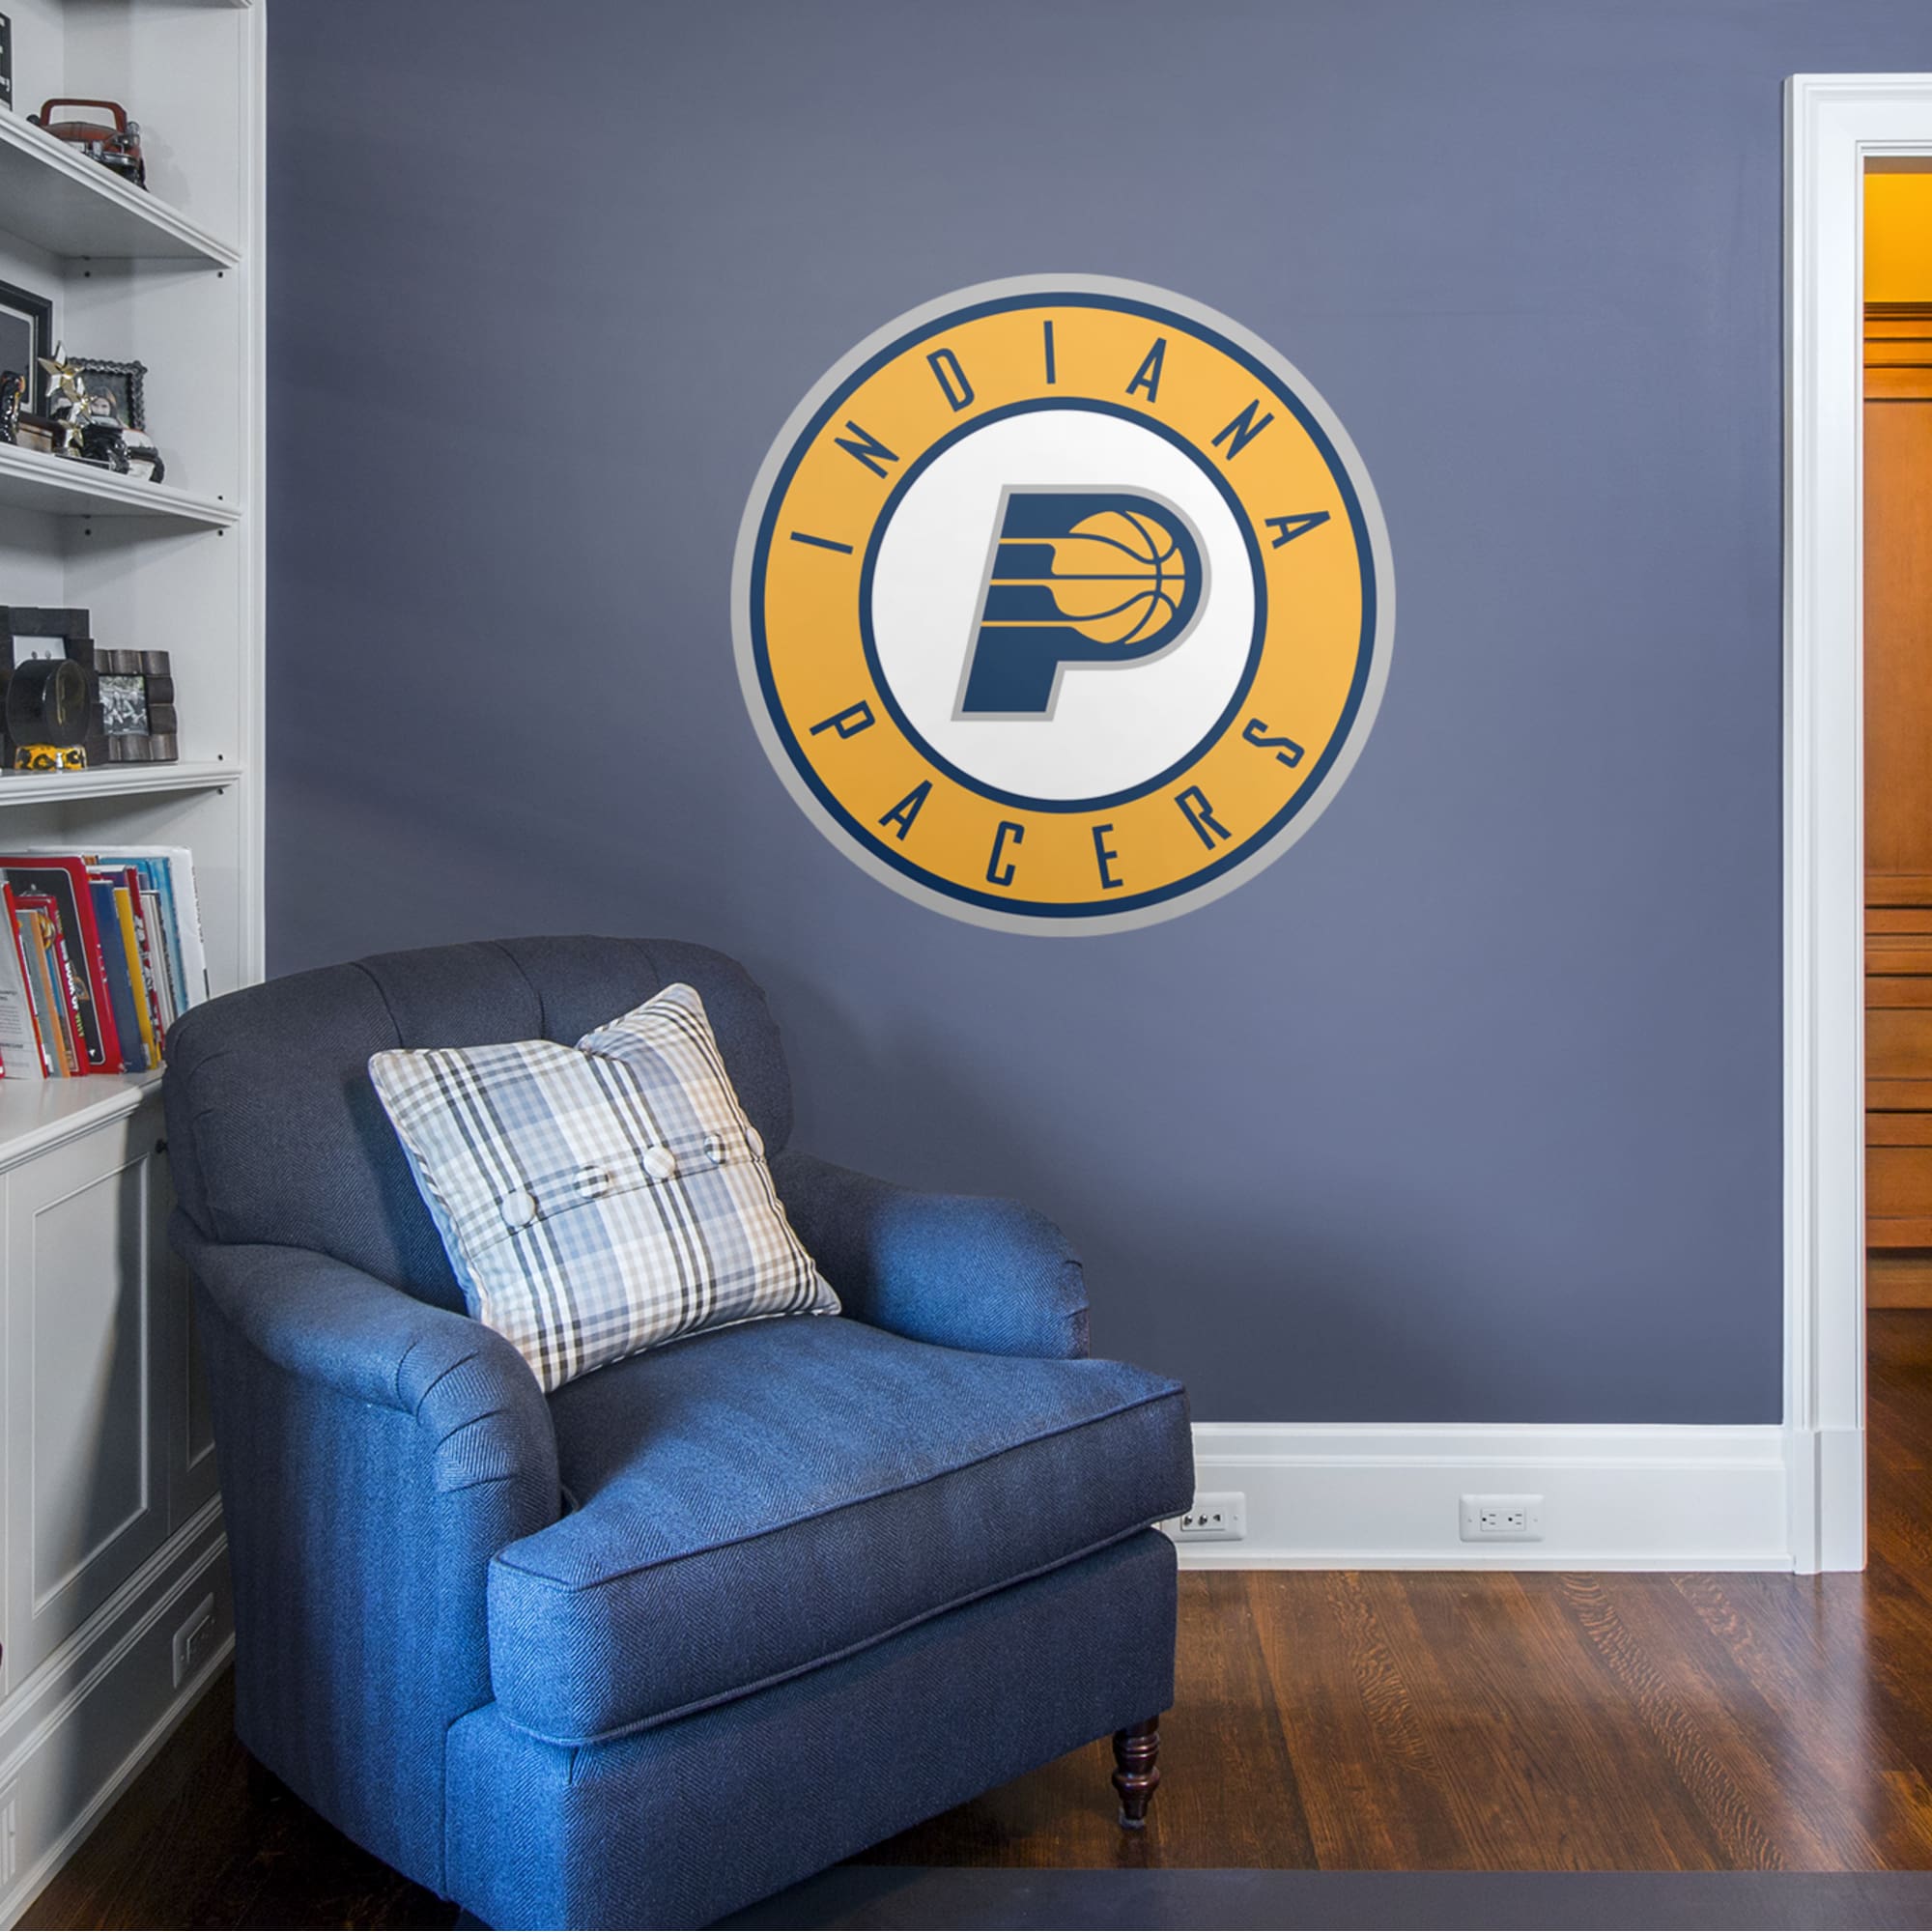 Indiana Pacers: Alternate Logo - Officially Licensed NBA Removable Wall Decal 38.0"W x 38.0"H by Fathead | Vinyl